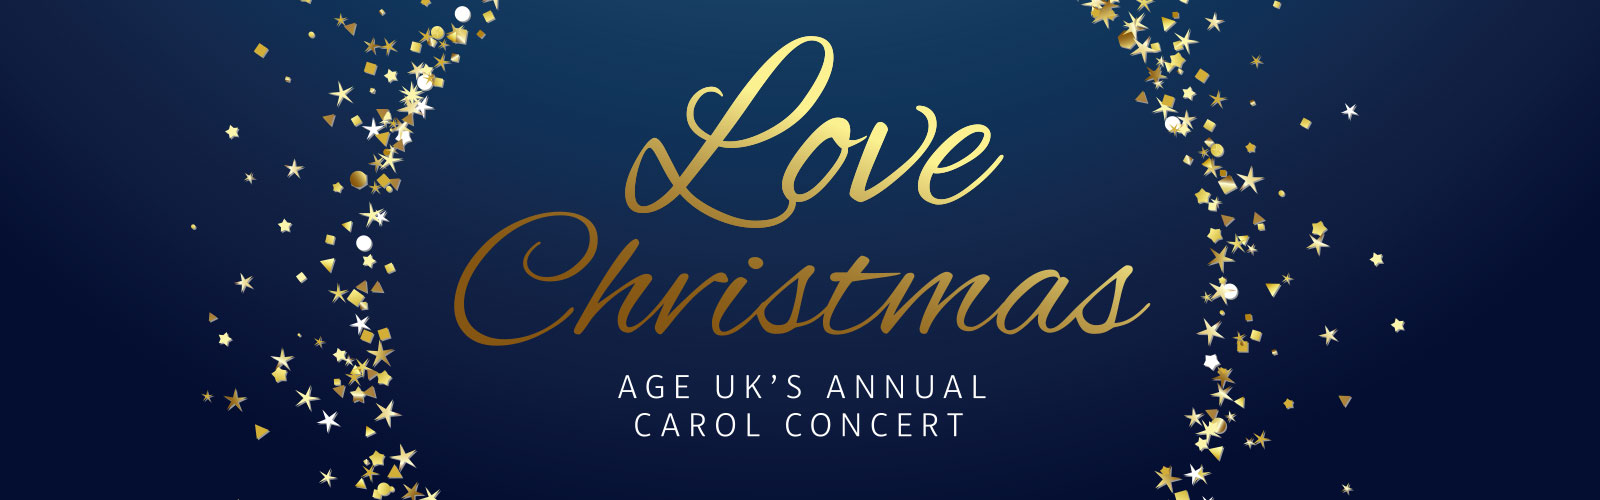 Dark blue banner with gold stars and the words Love Christmas - Age UK's annual carol concert written in gold